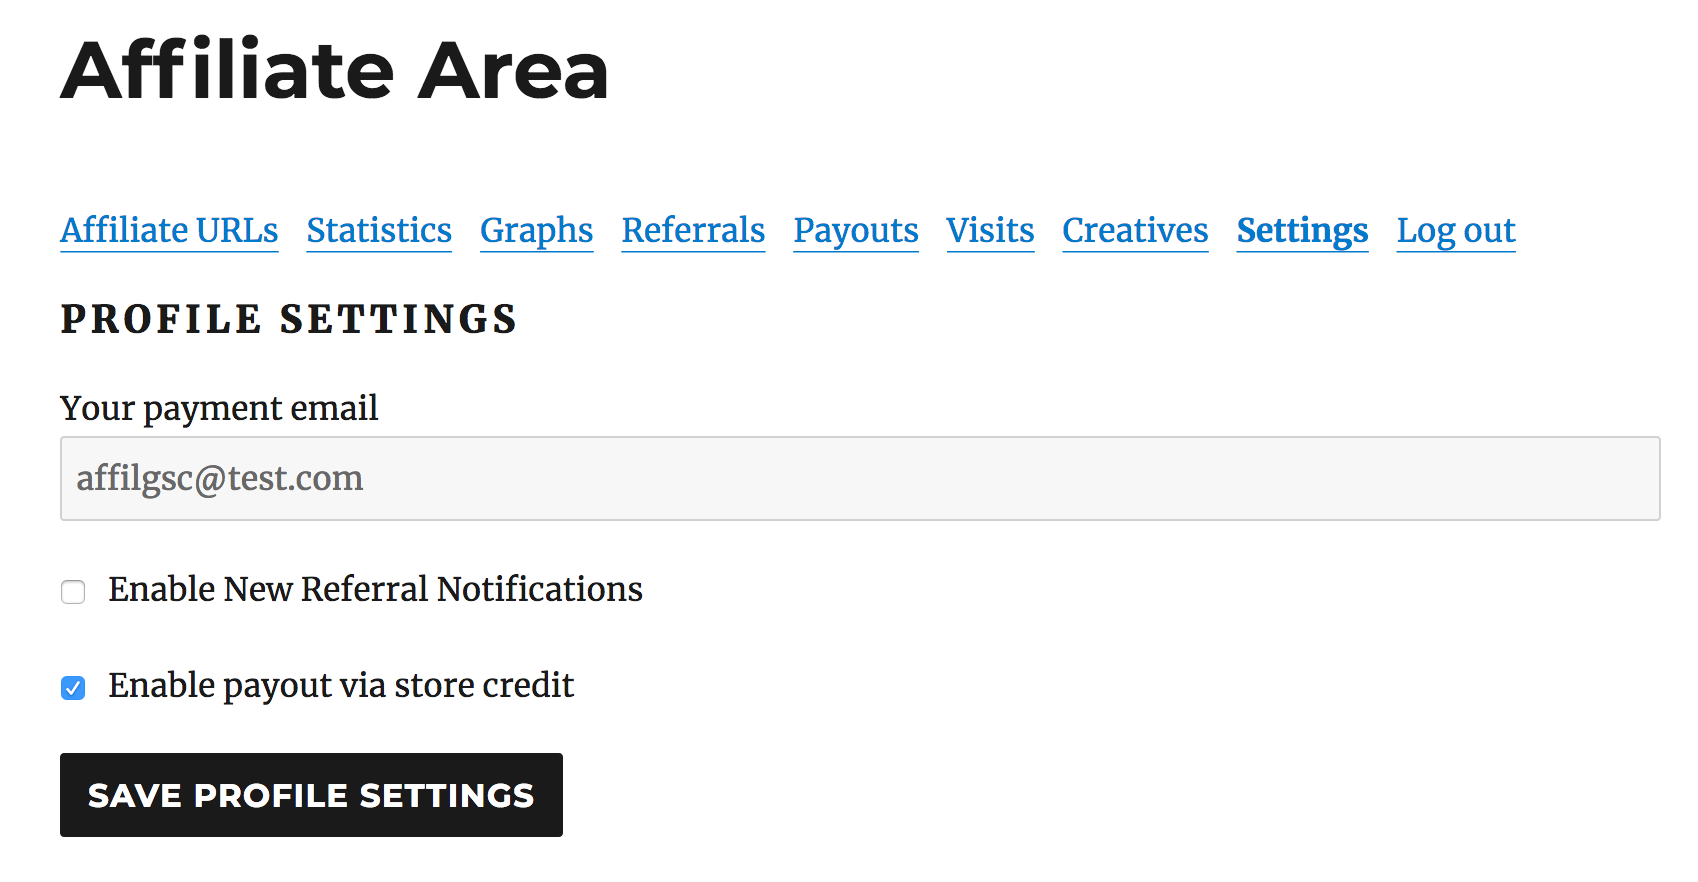 Affiliate Area Settings enable store credit payouts